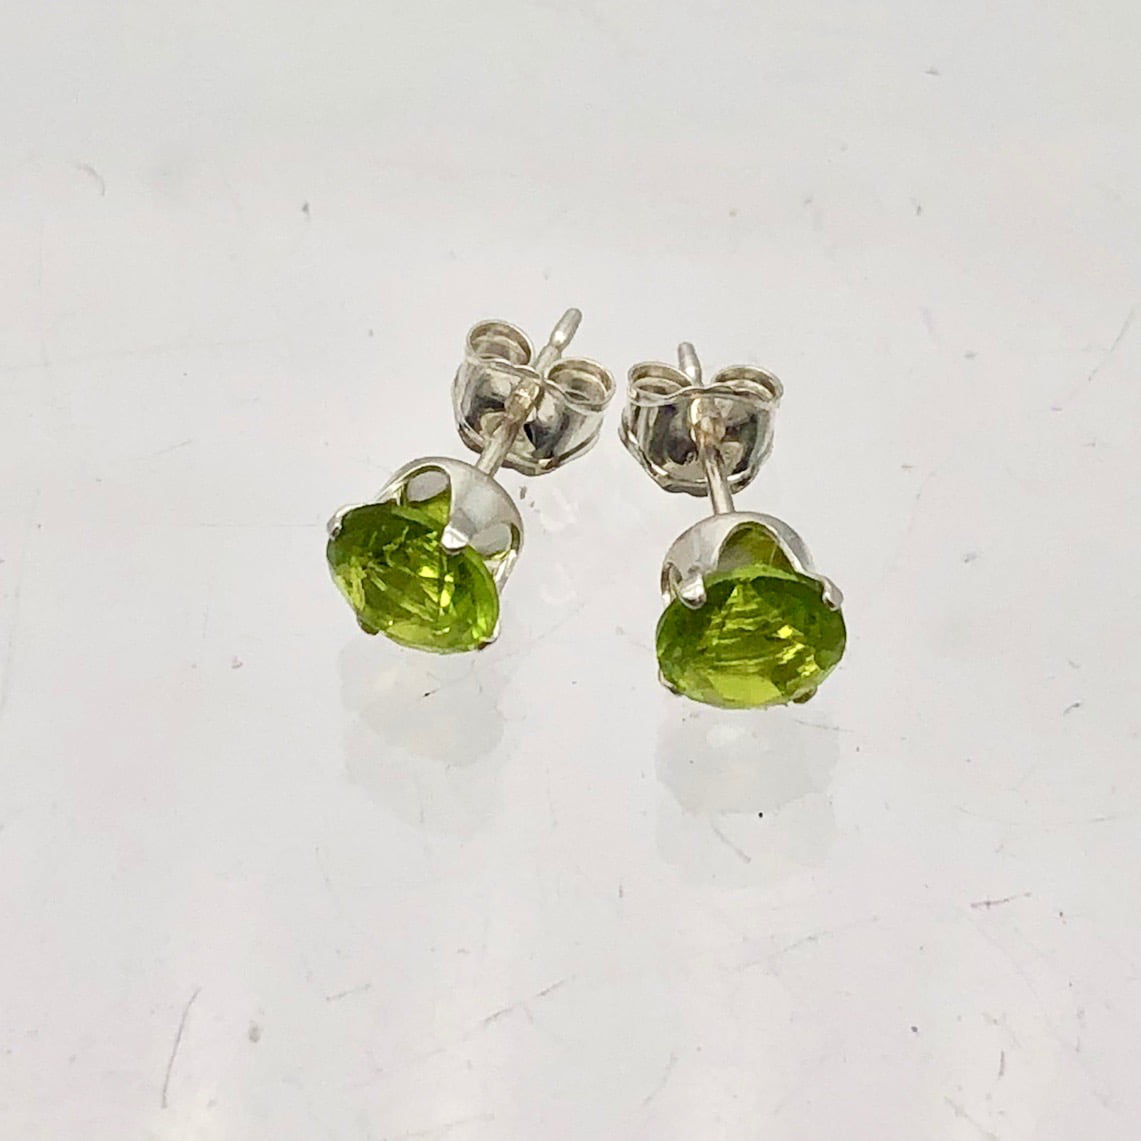 Details about   Natural Peridot Stud Earrings 5 MM Round Silver Settings August Birthstone 1tcw 